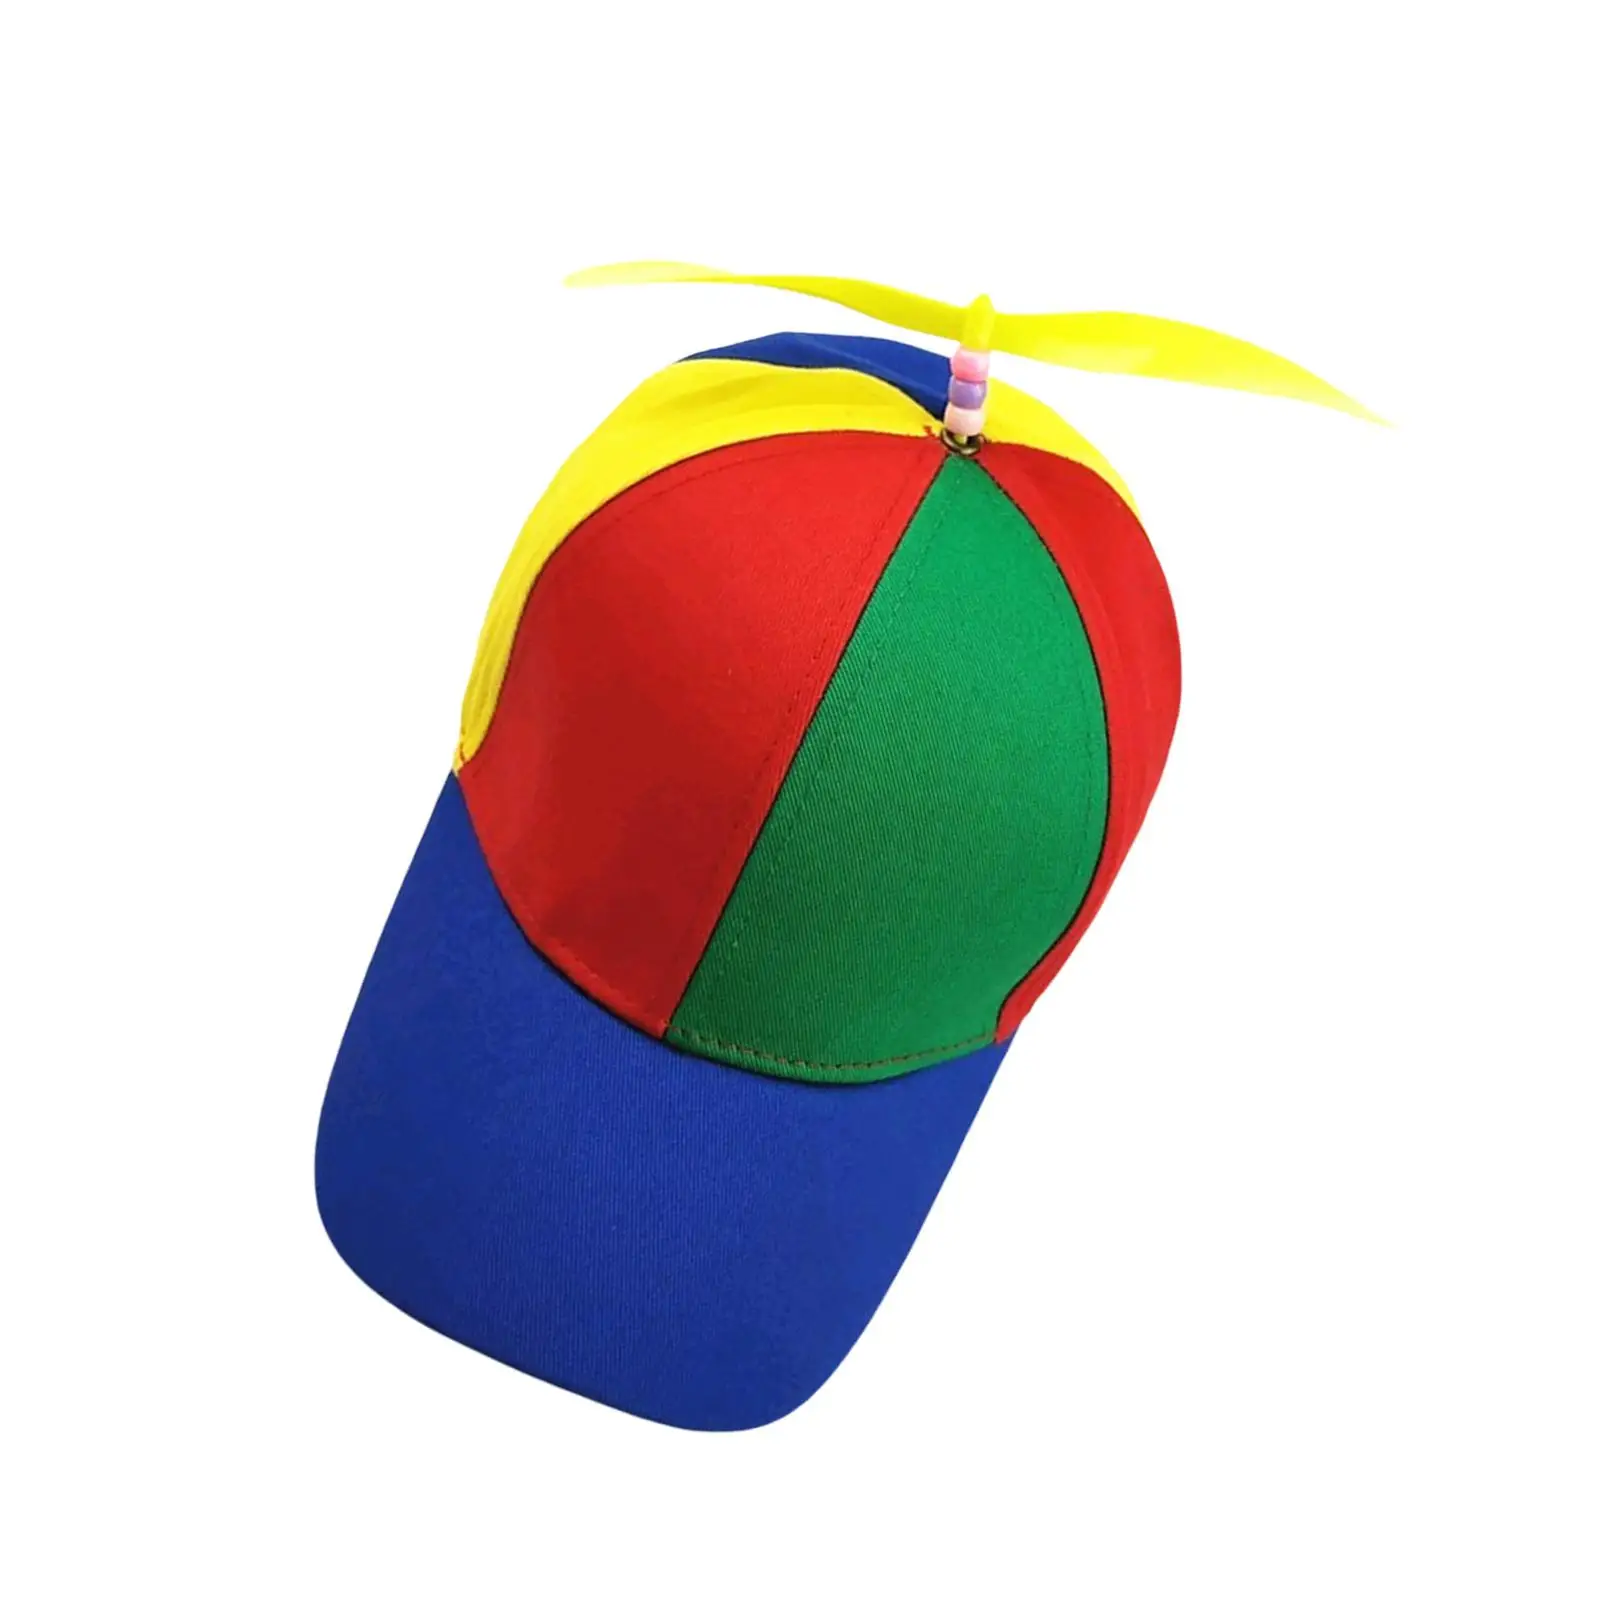 Funny Propeller Hat Colorful Novelty Breathable Baseball Cap Helicopter Caps for Costume Outdoor Casual Fancy Dress Kids